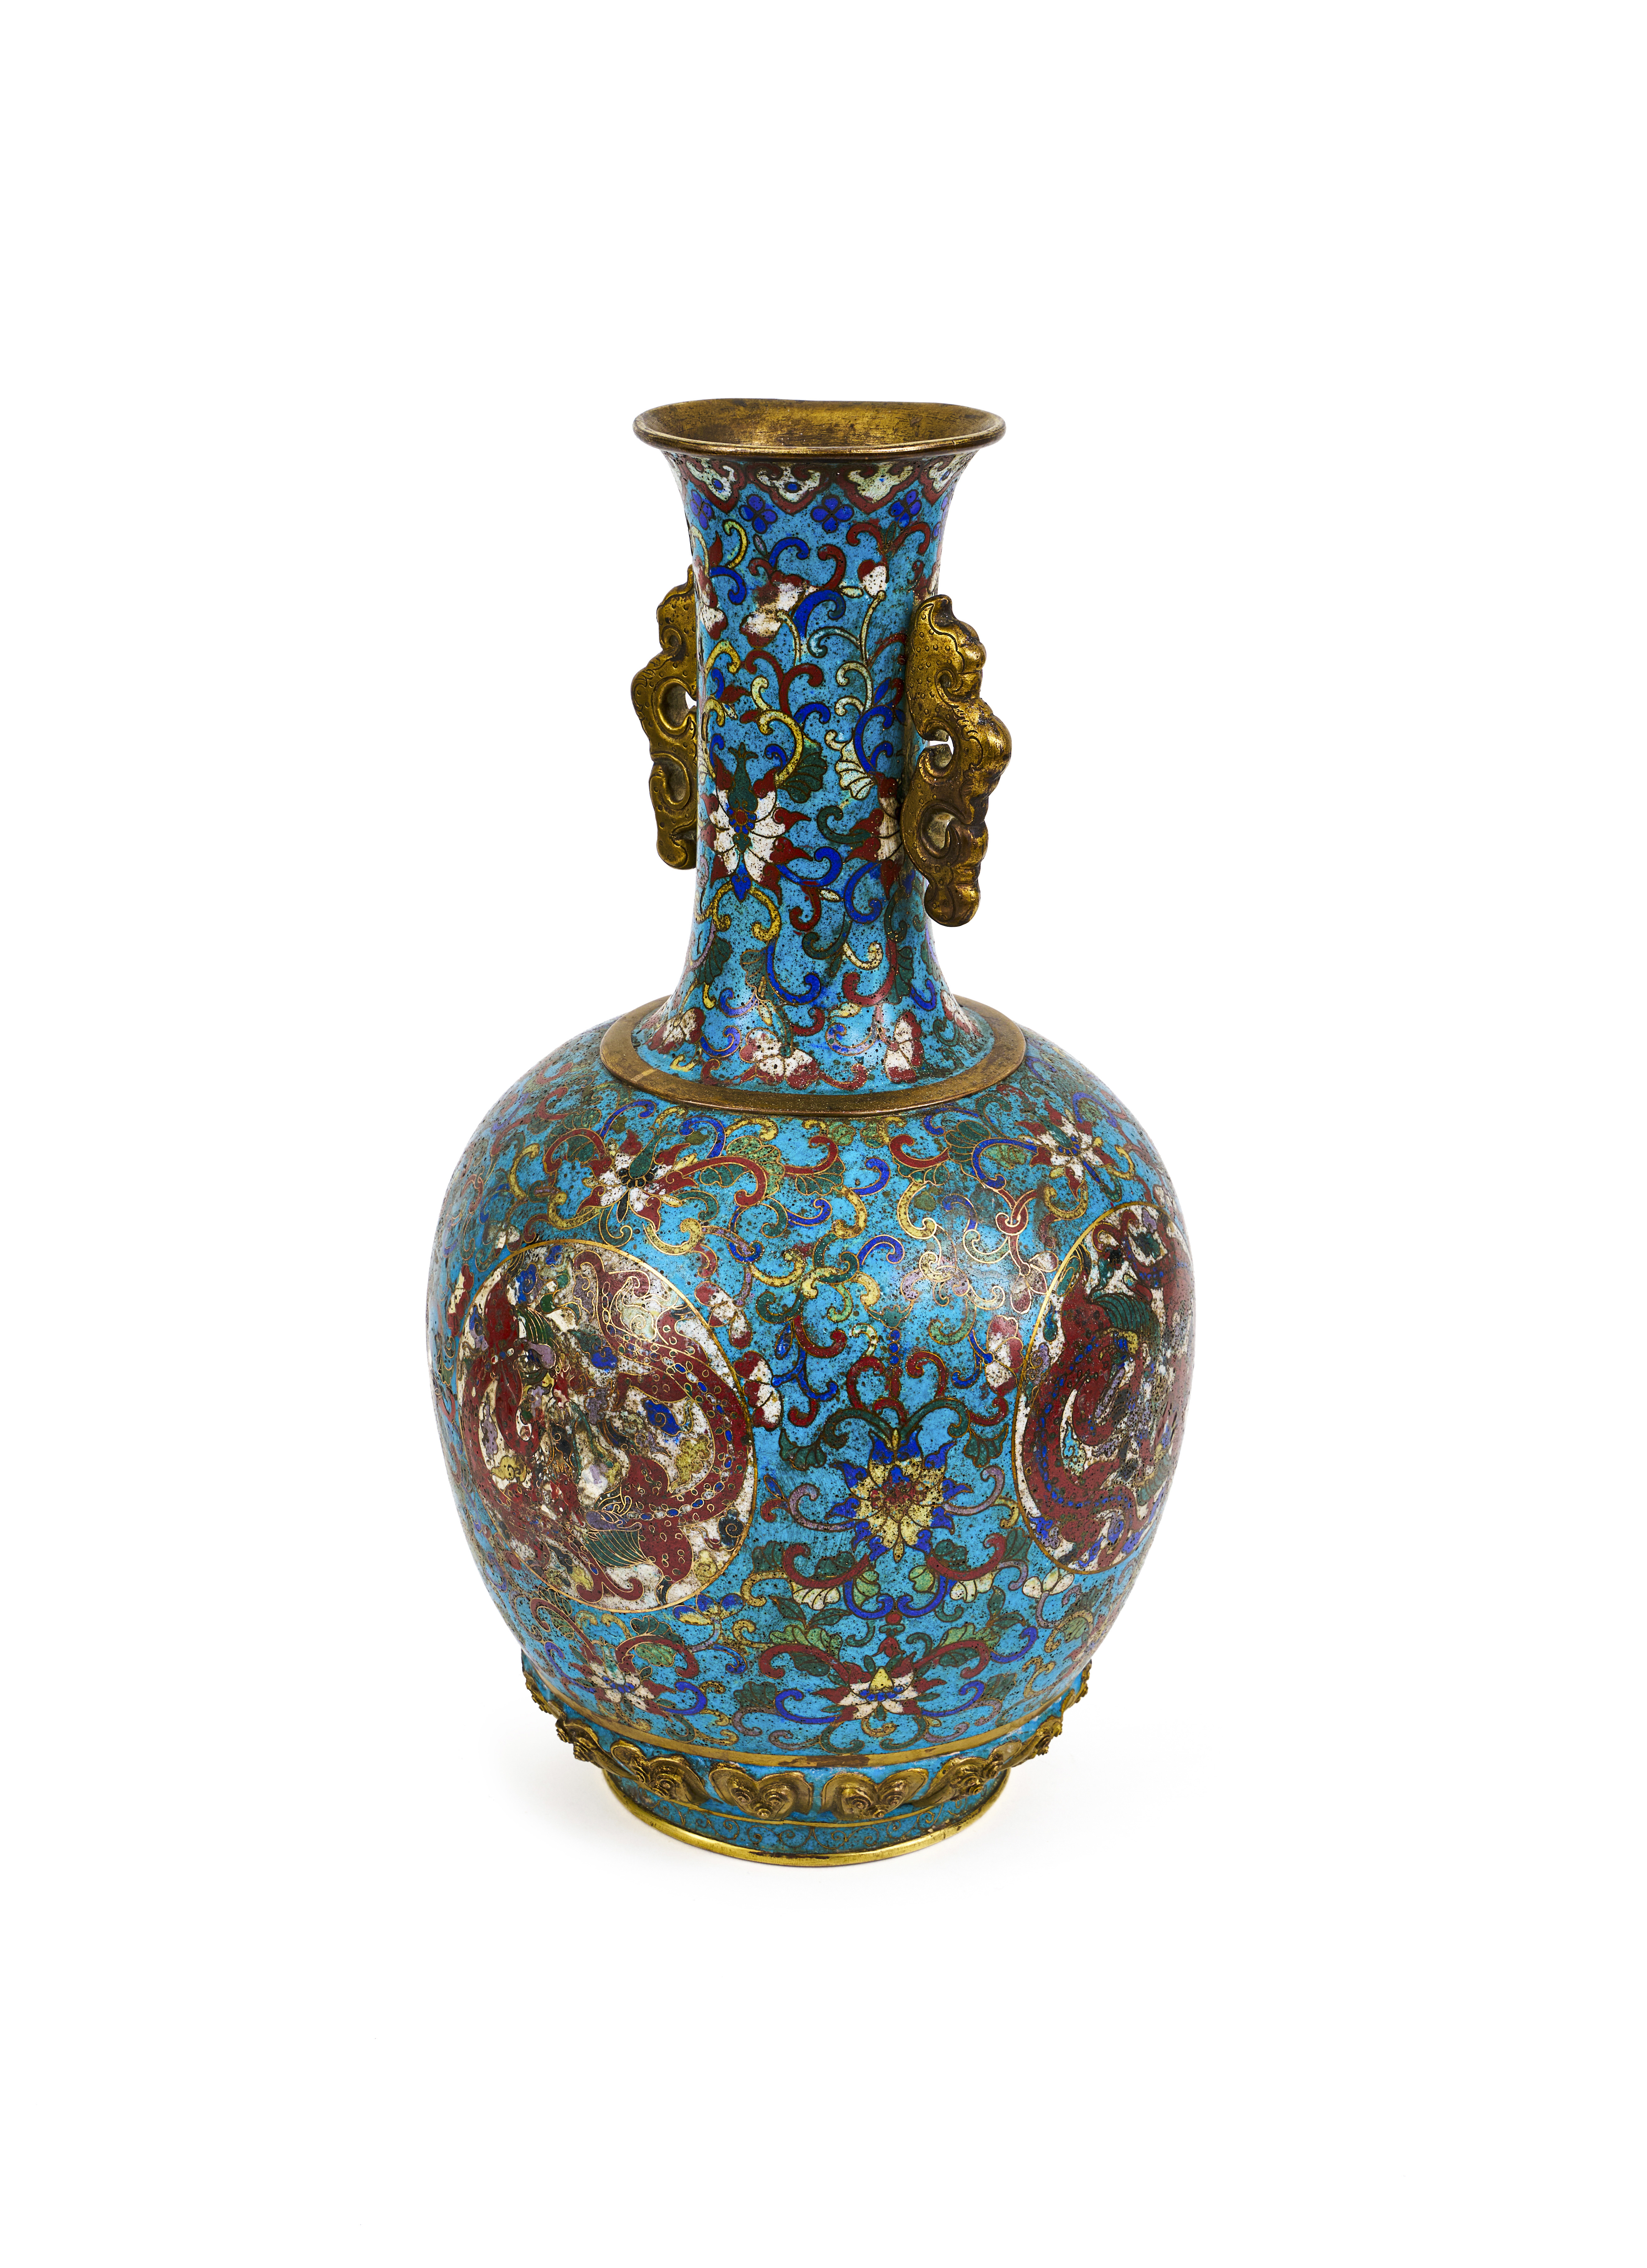 A LARGE CHINESE CLOISONNE VASE, QIANLONG PERIOD (1736-1795) - Image 4 of 5